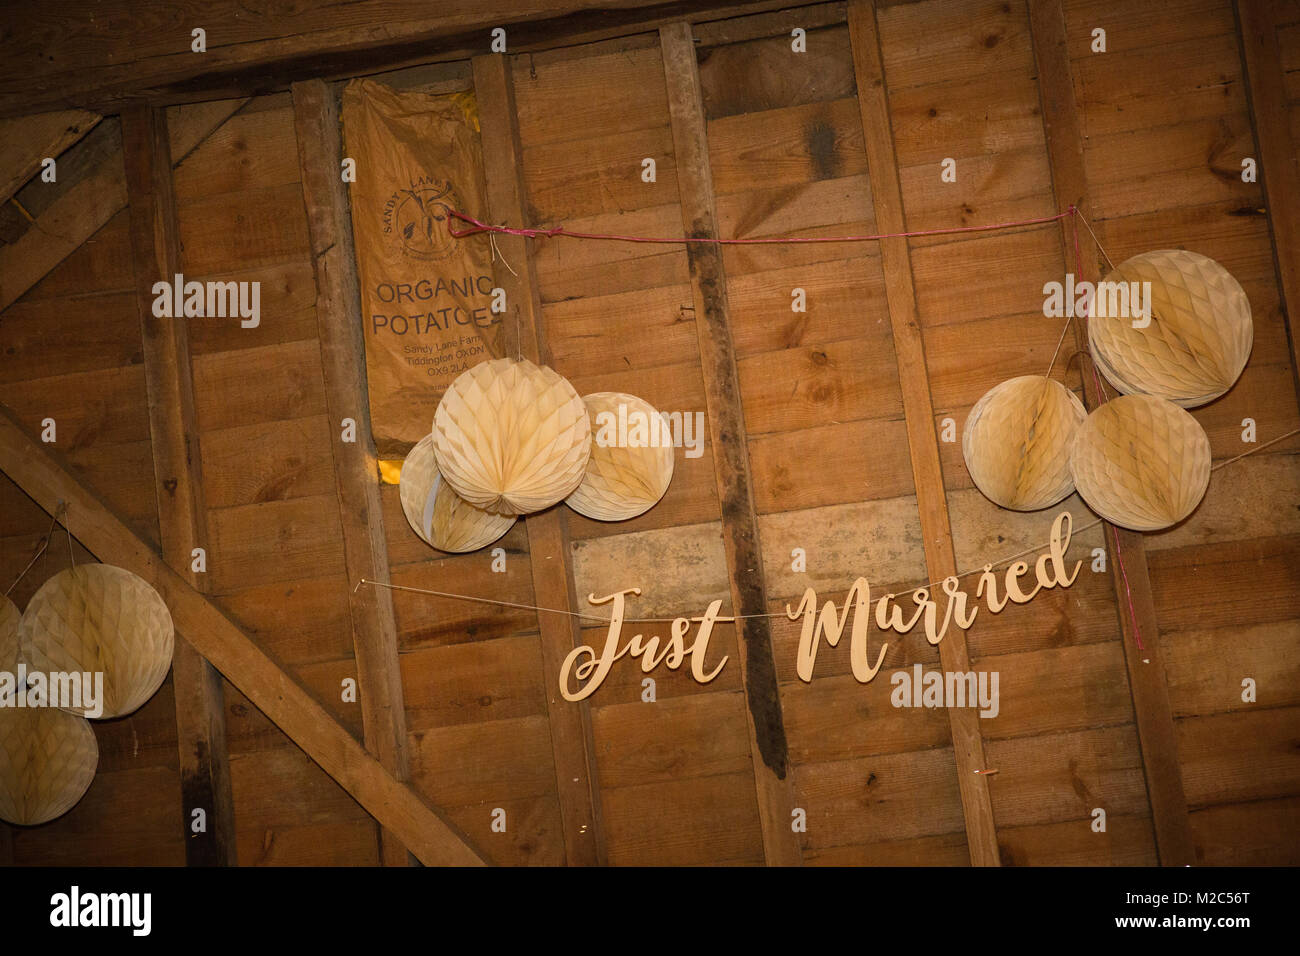 Paper decorations hanging in barn with 'Just Married' sign Stock Photo